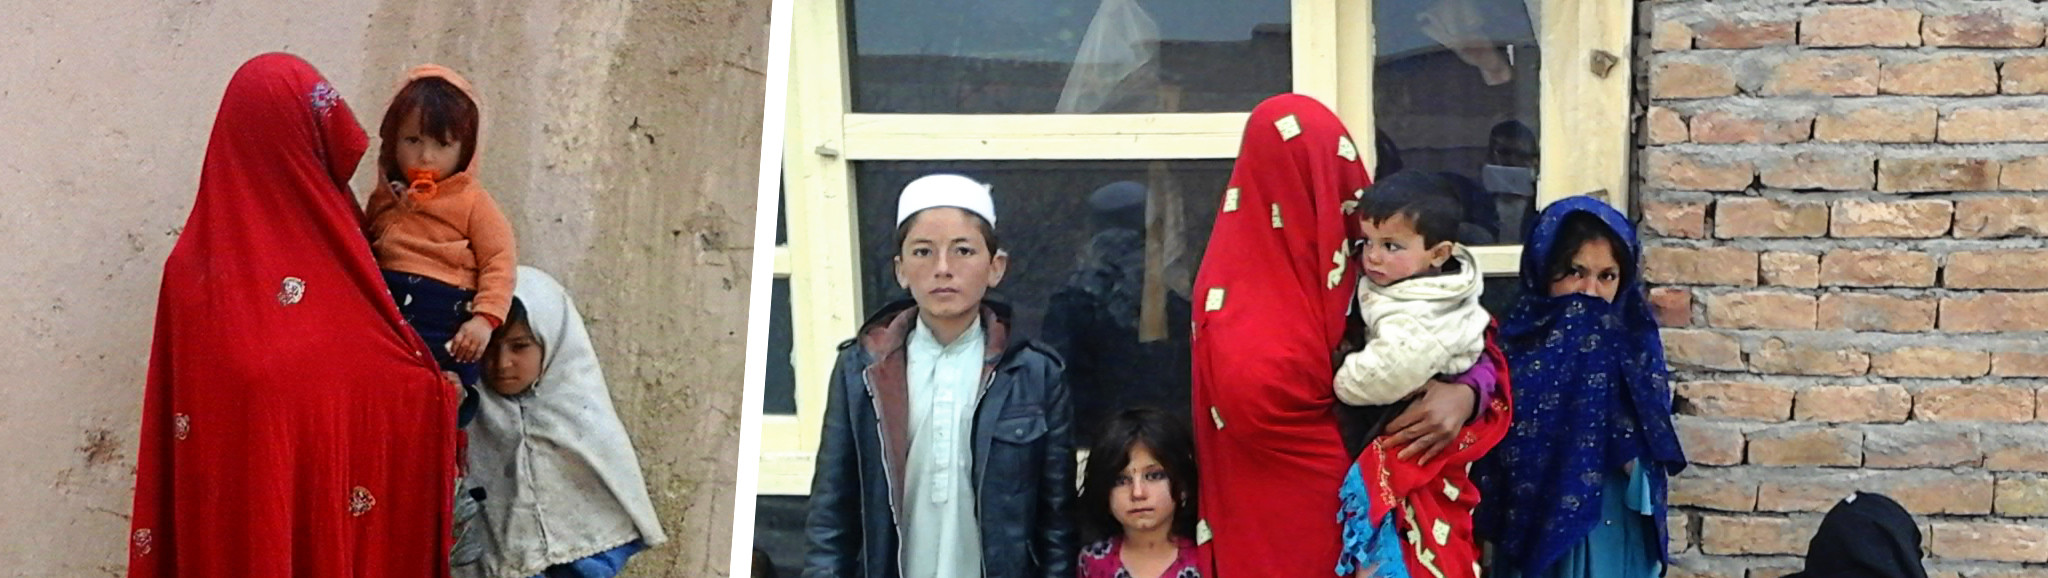 Saadia, a widowed mother of 4 escaped fighting in Afghanistan. Now she can rent a house and buy food